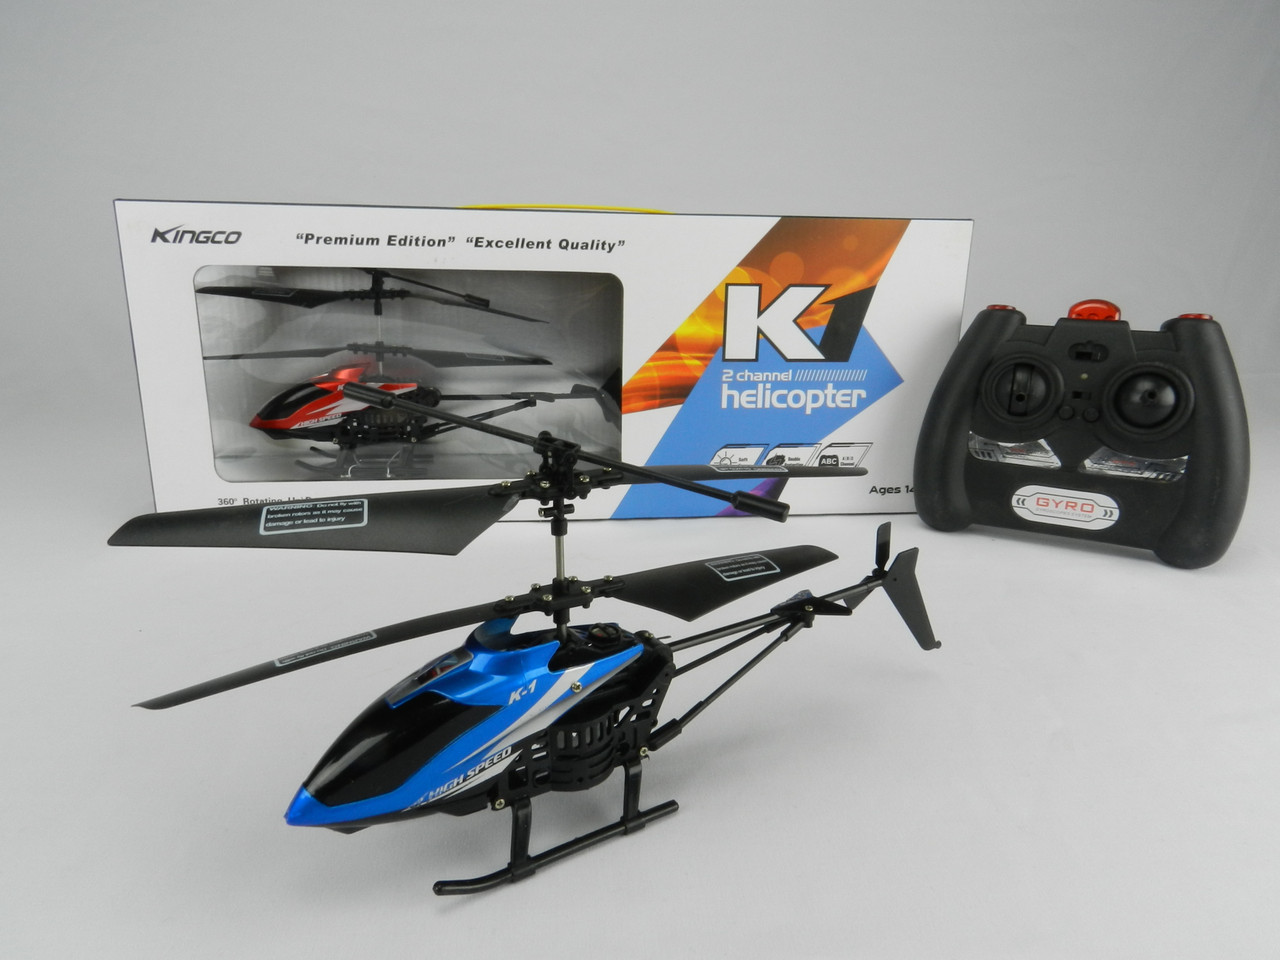 2.5 CH HELICOPTER W/ GYRO